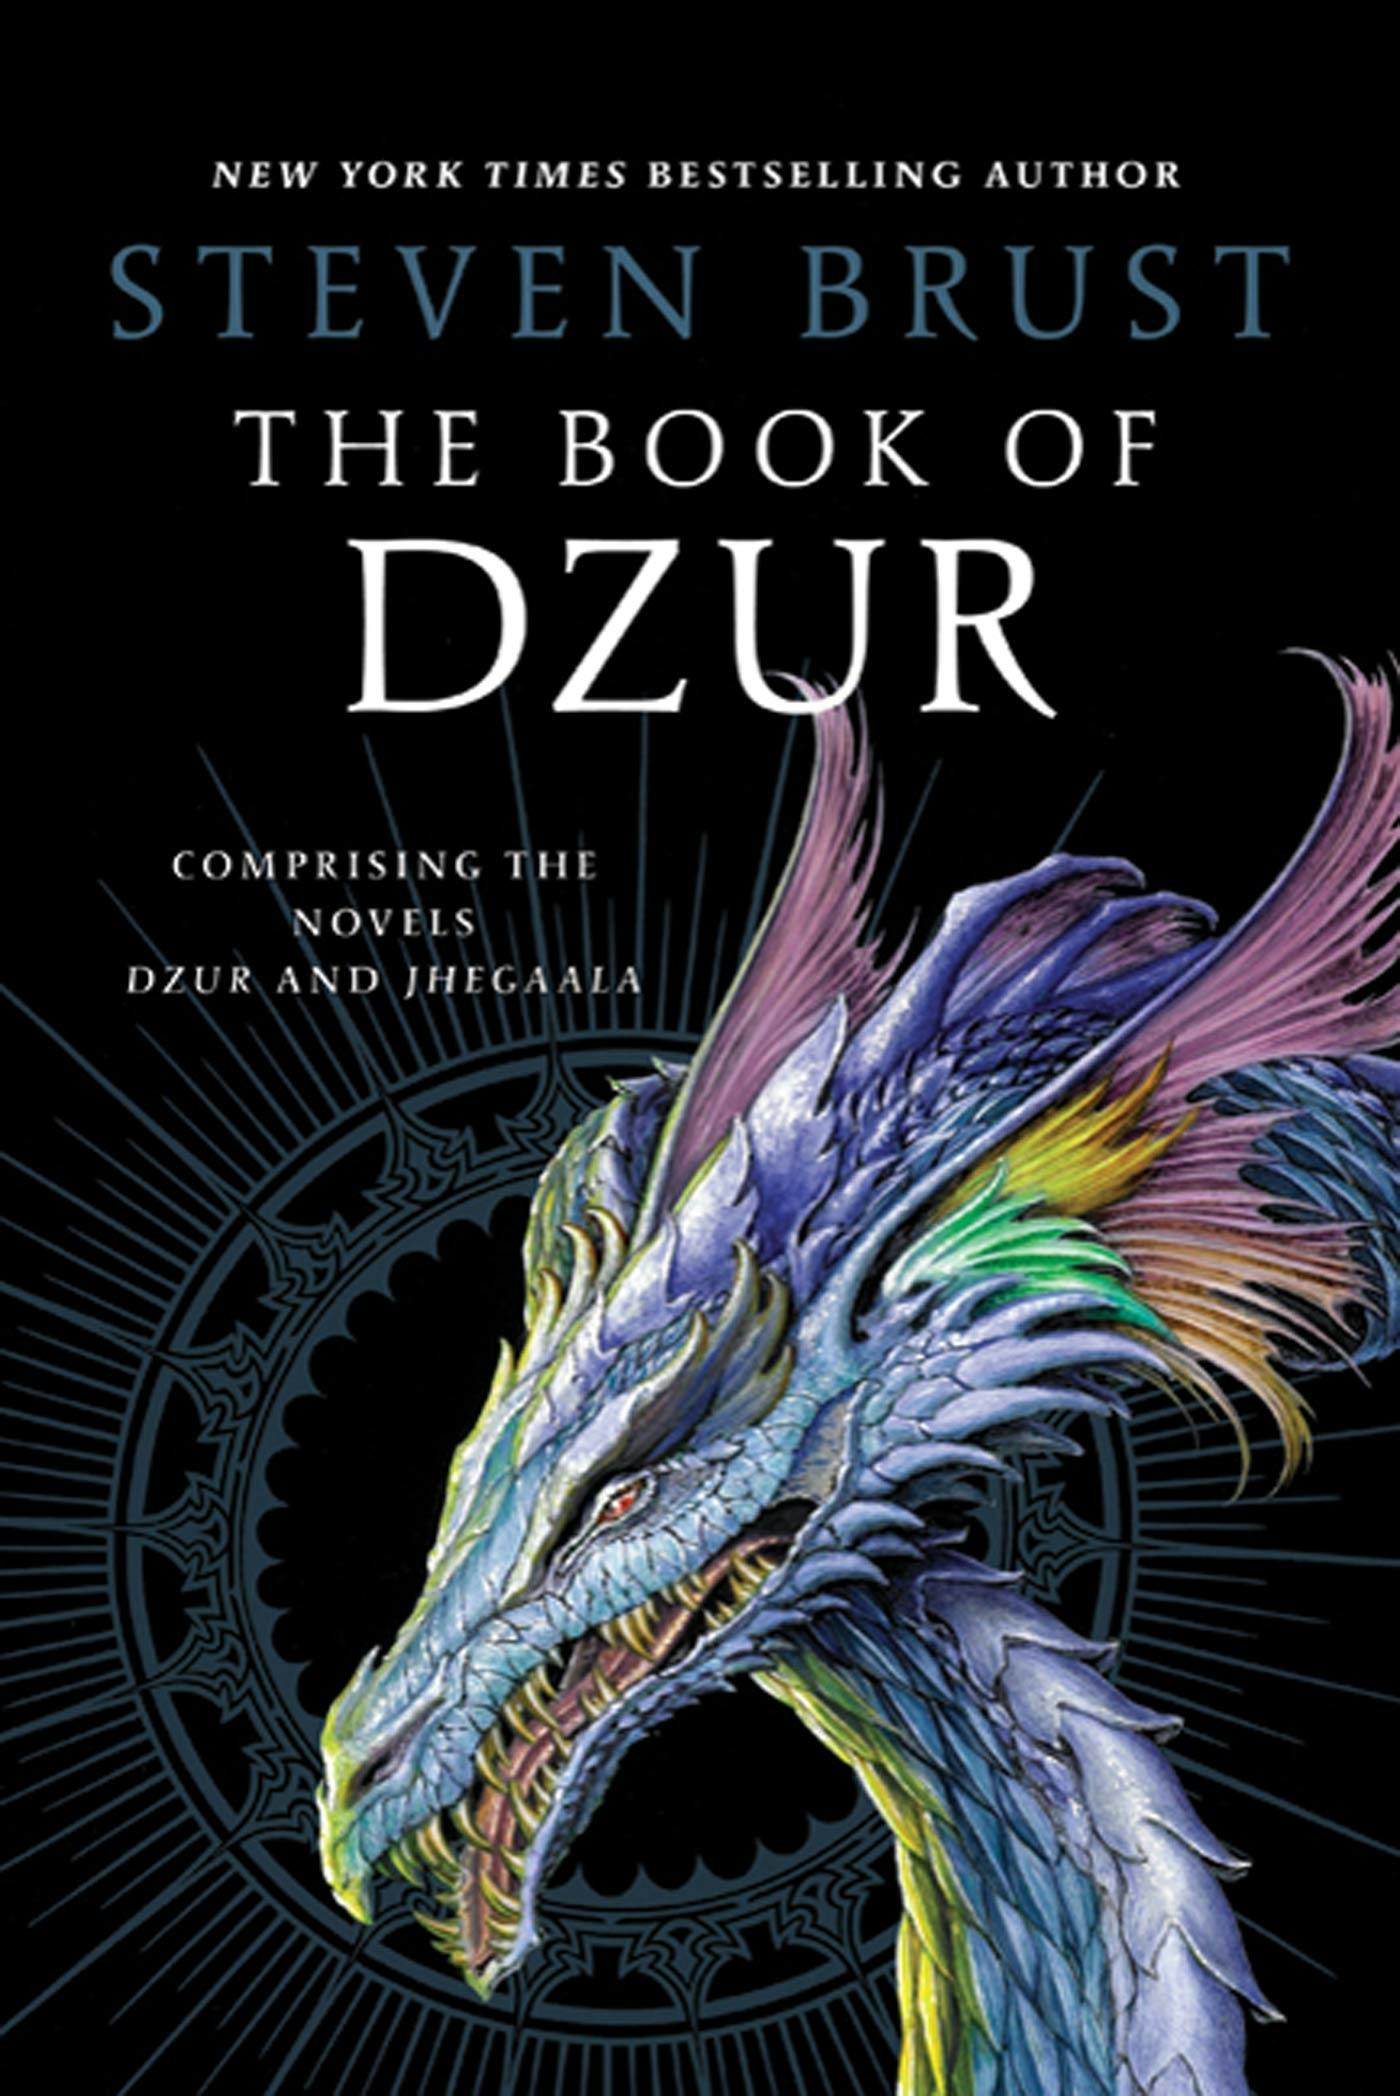 Cover for the book titled as: The Book of Dzur